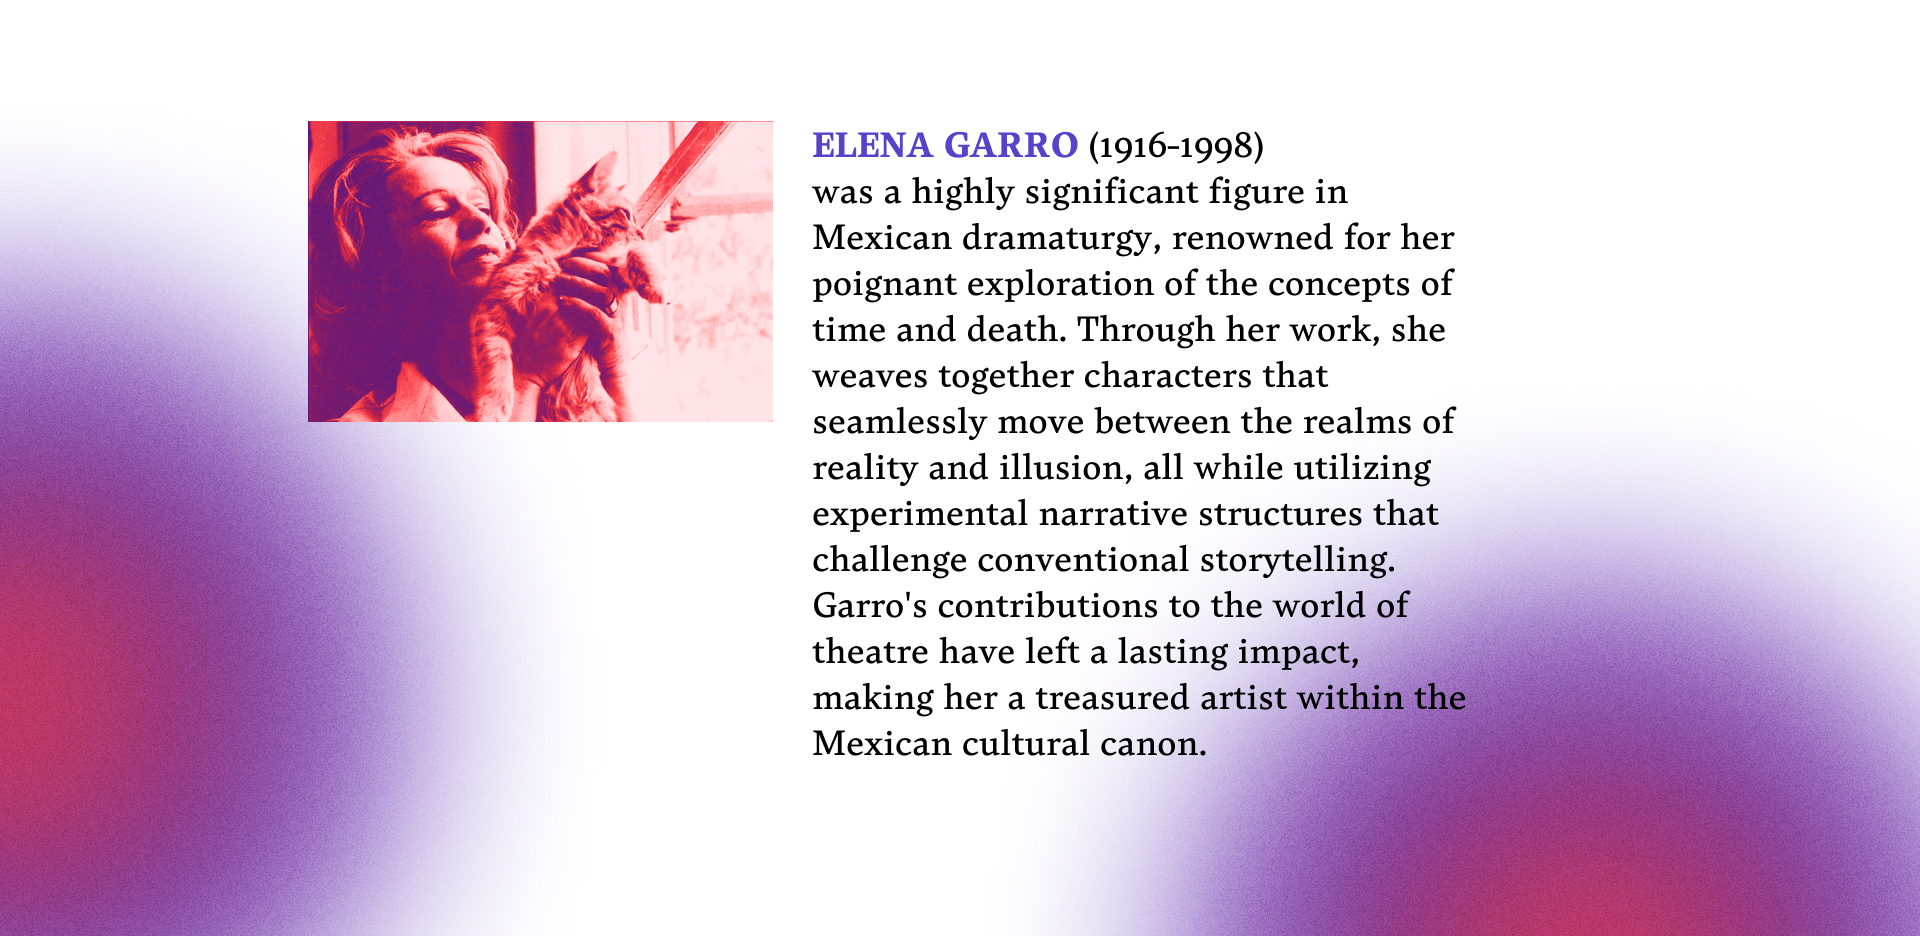 Image and bio of Elena Garro. ELENA GARRO (1916-1998) was a highly significant figure in Mexican dramaturgy, renowned for her poignant exploration of the concepts of time and death.